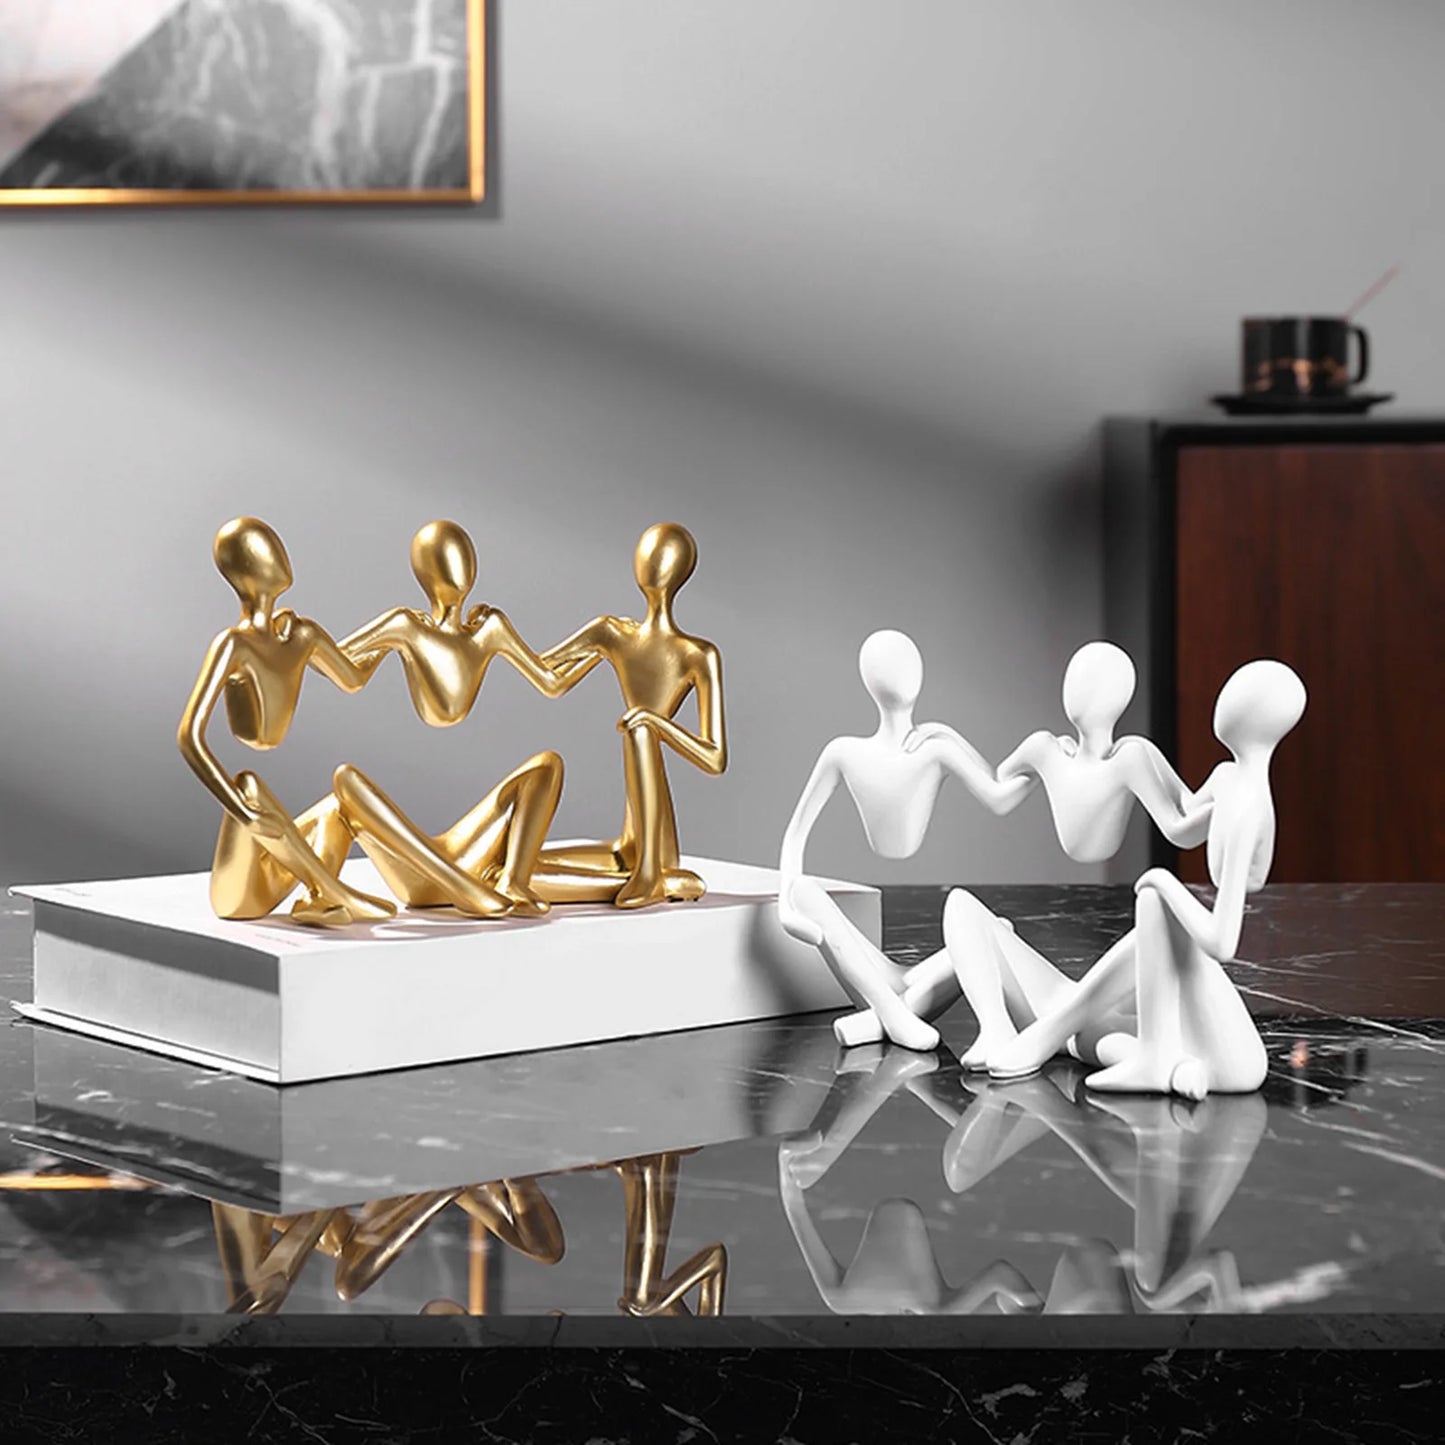 Thinking Statue Home Decoration Art Character Decorative Collection Shelf Figurine Abstract Sculpture for Indoor Coffee Table